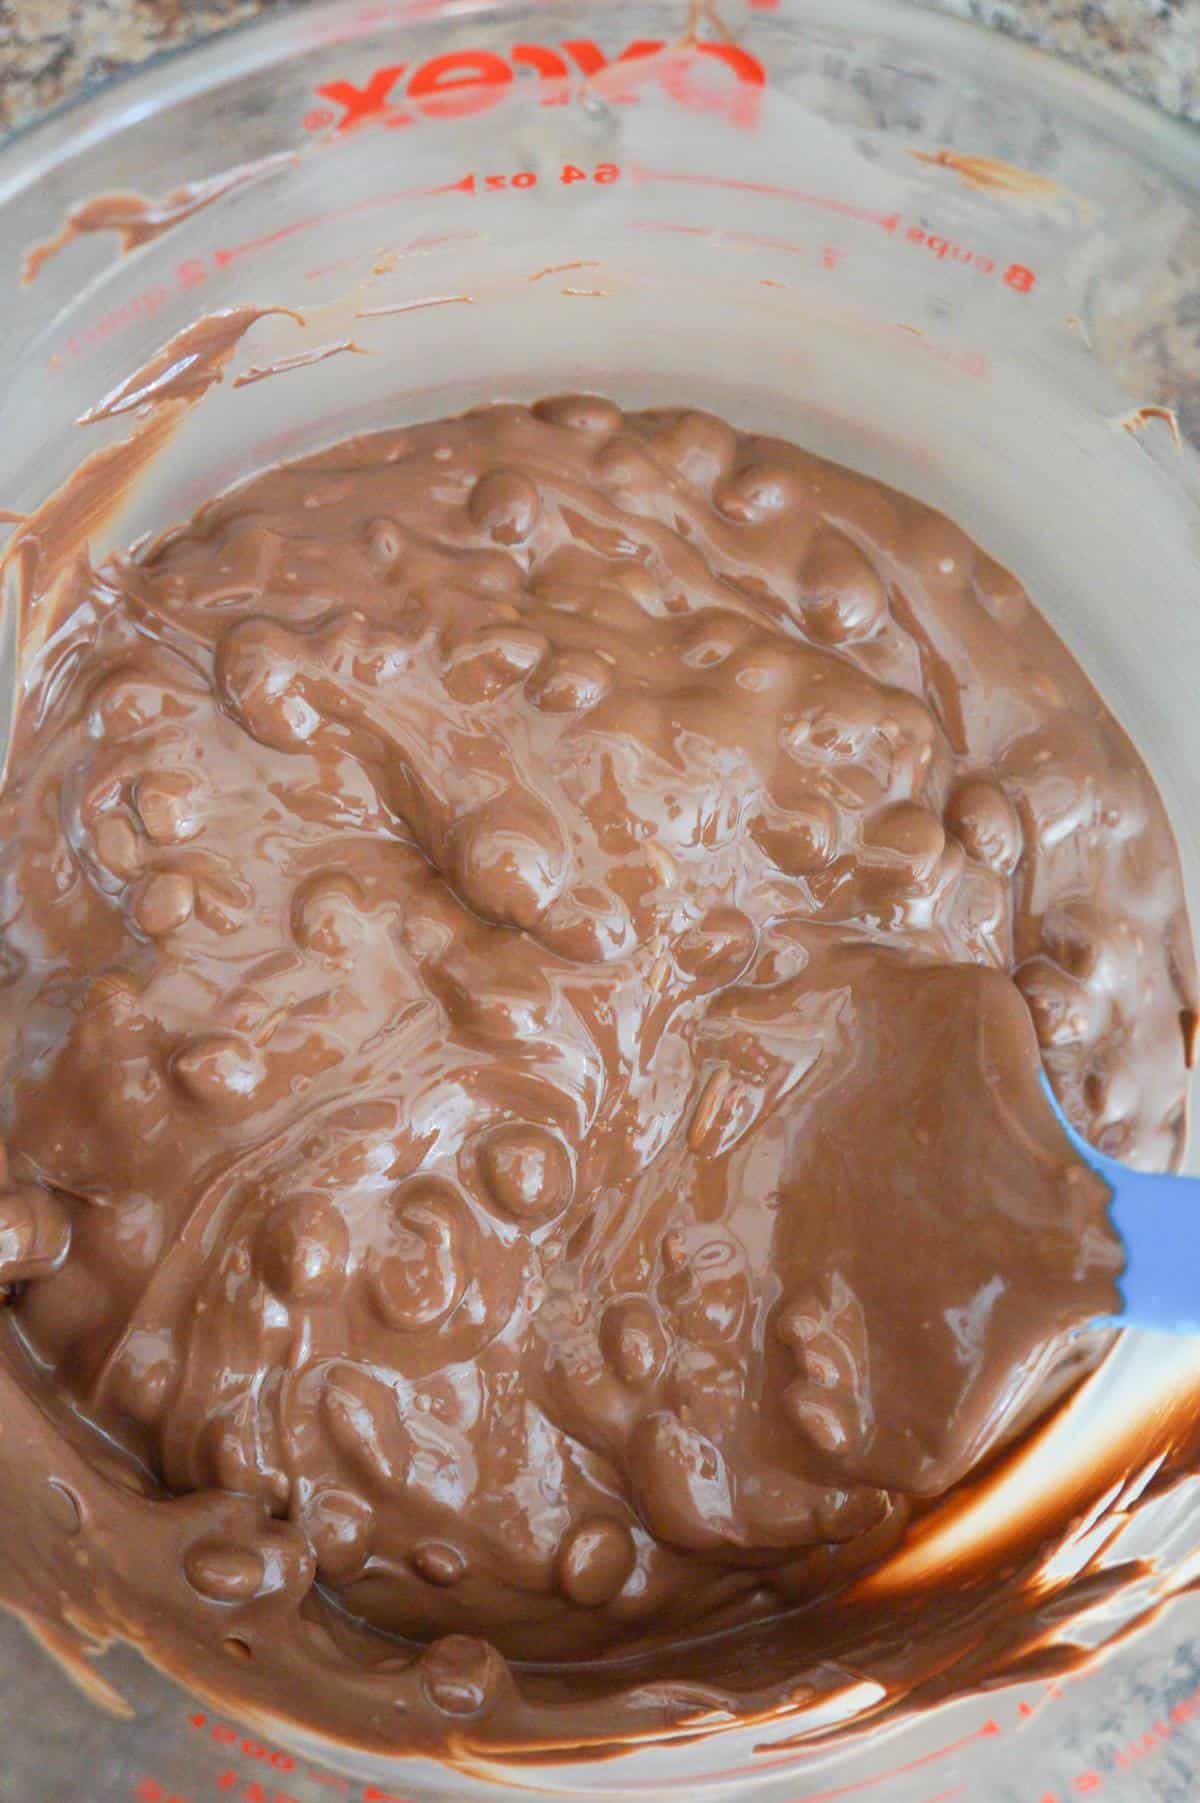 milk chocolate chips and Nutella being stirred together in a glass bowl